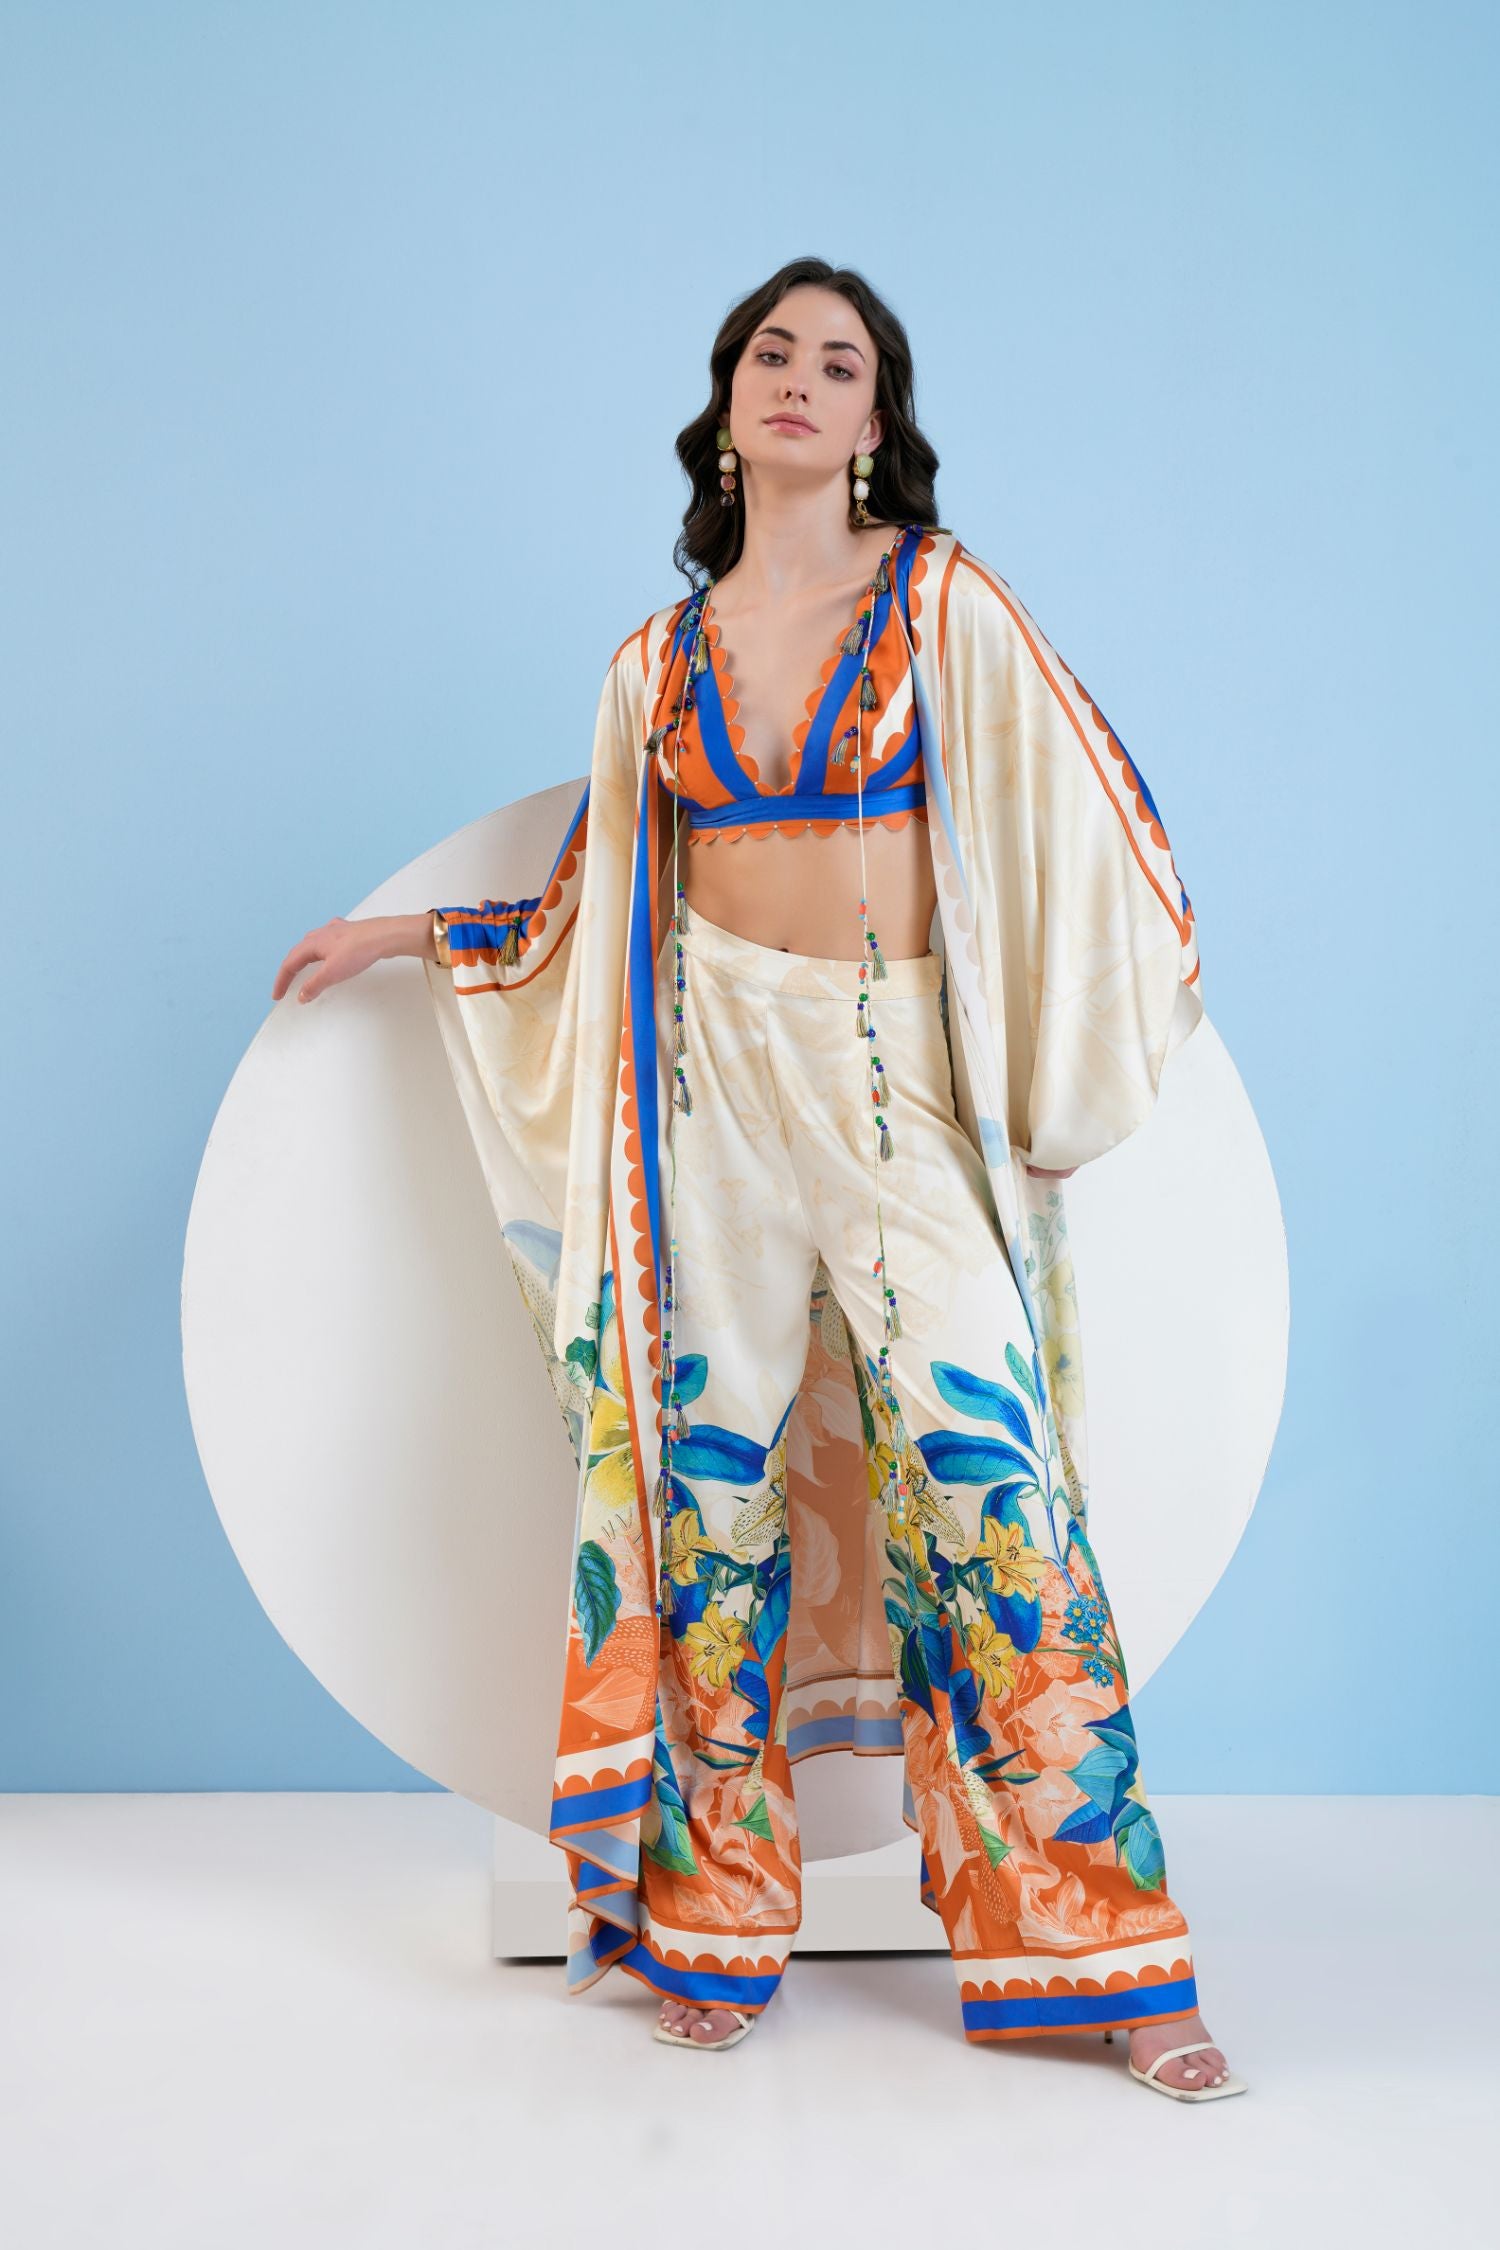 Vivid Floral Printed Cape, Pants And Bustier With Scallop Neckline